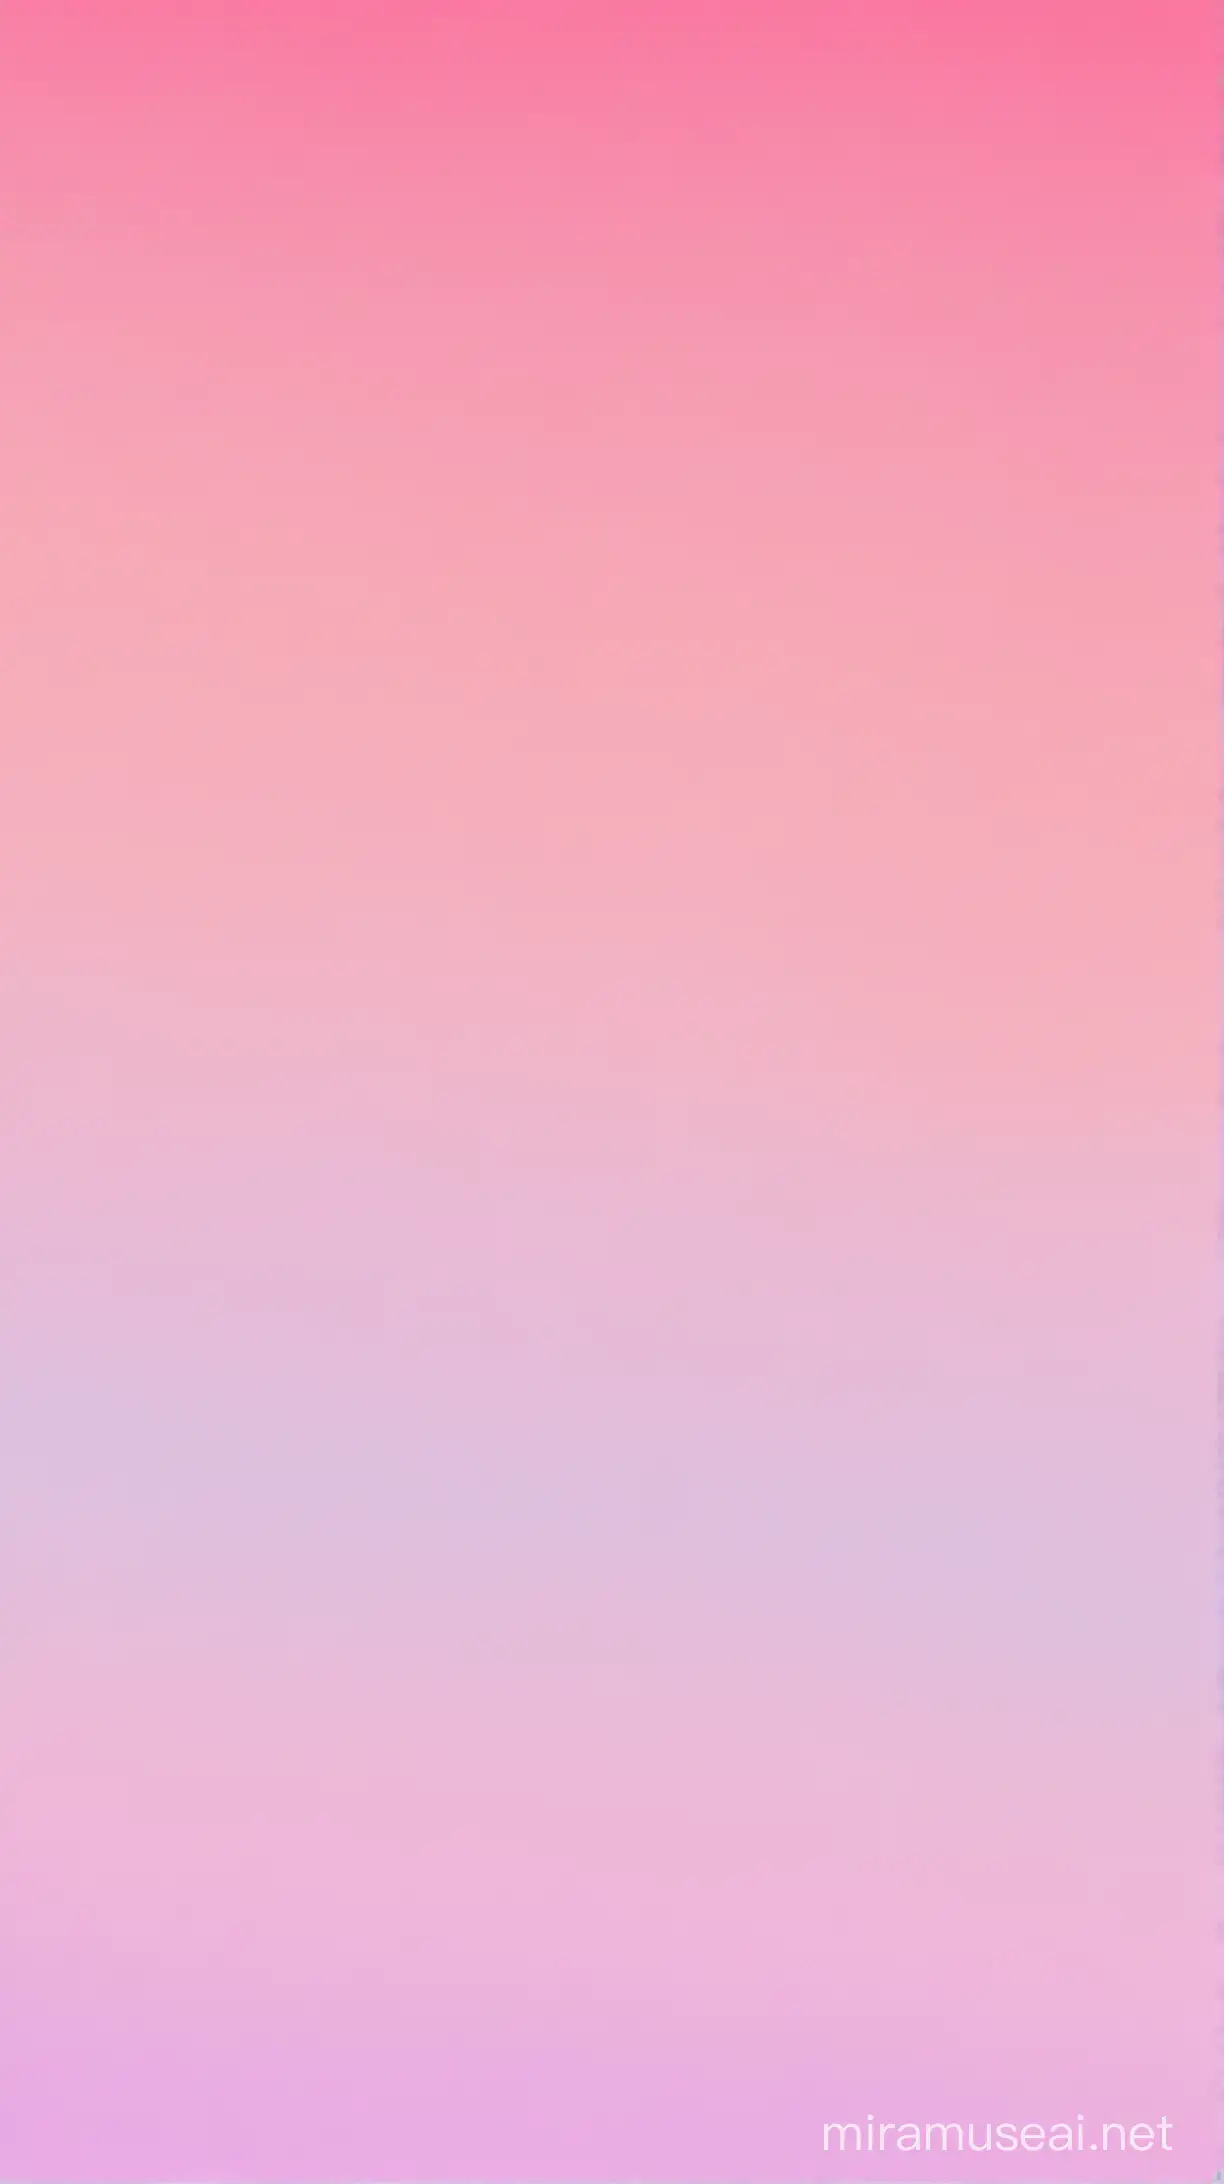 Vibrant Gradient Pastel Background with Soft Color Transitions